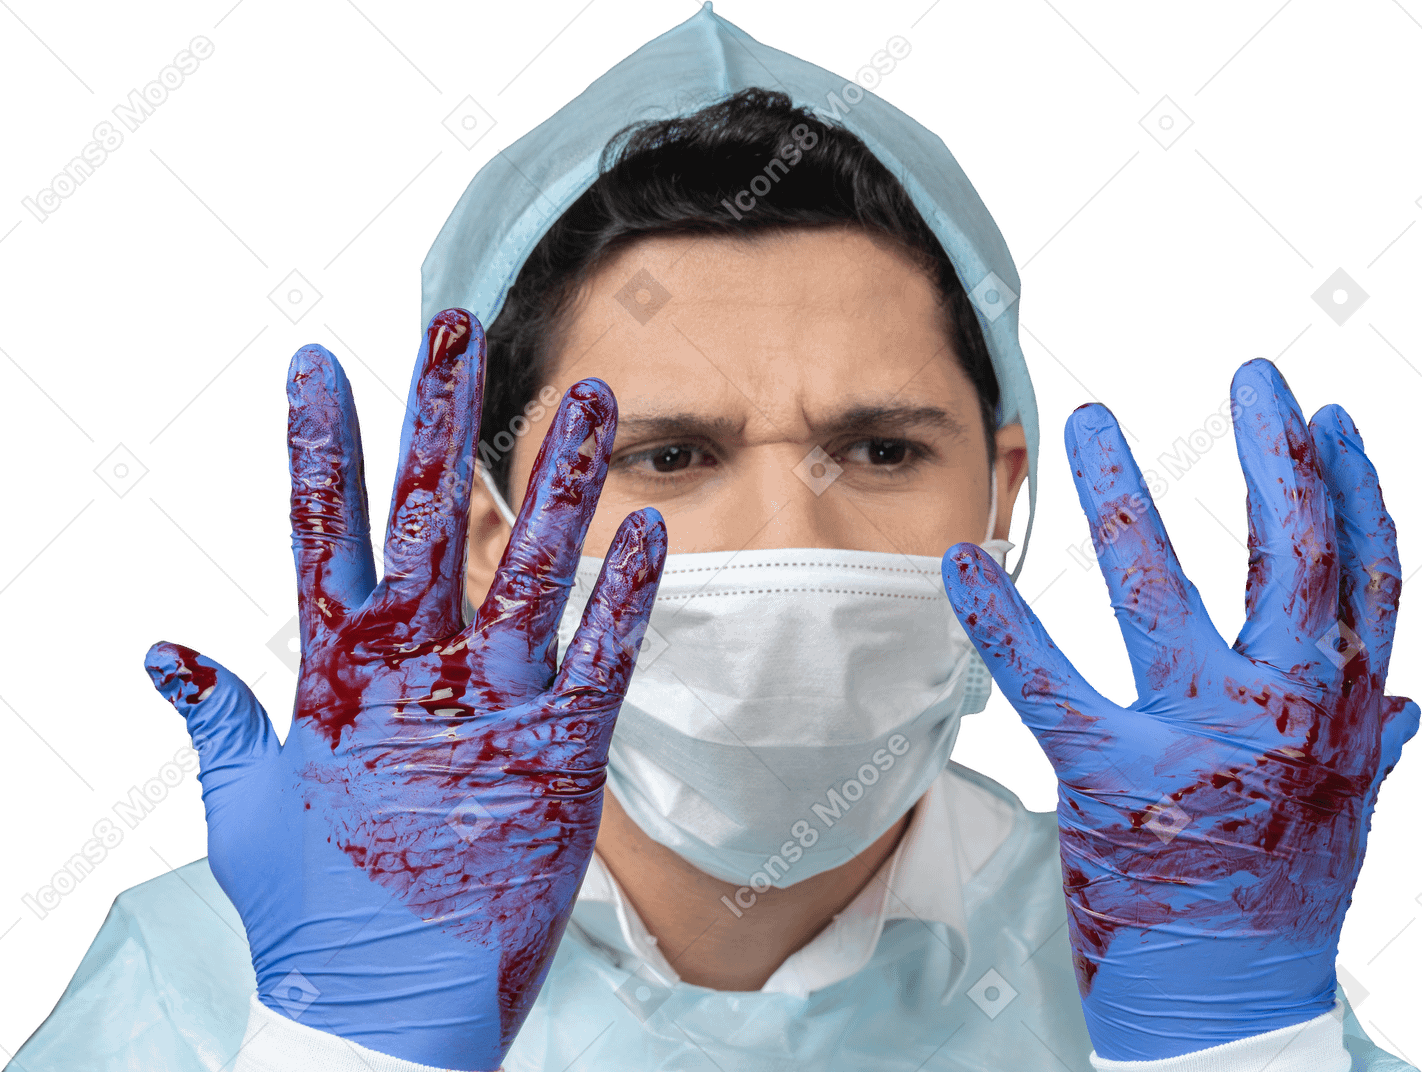 Doctor looking at his hands covered in blood